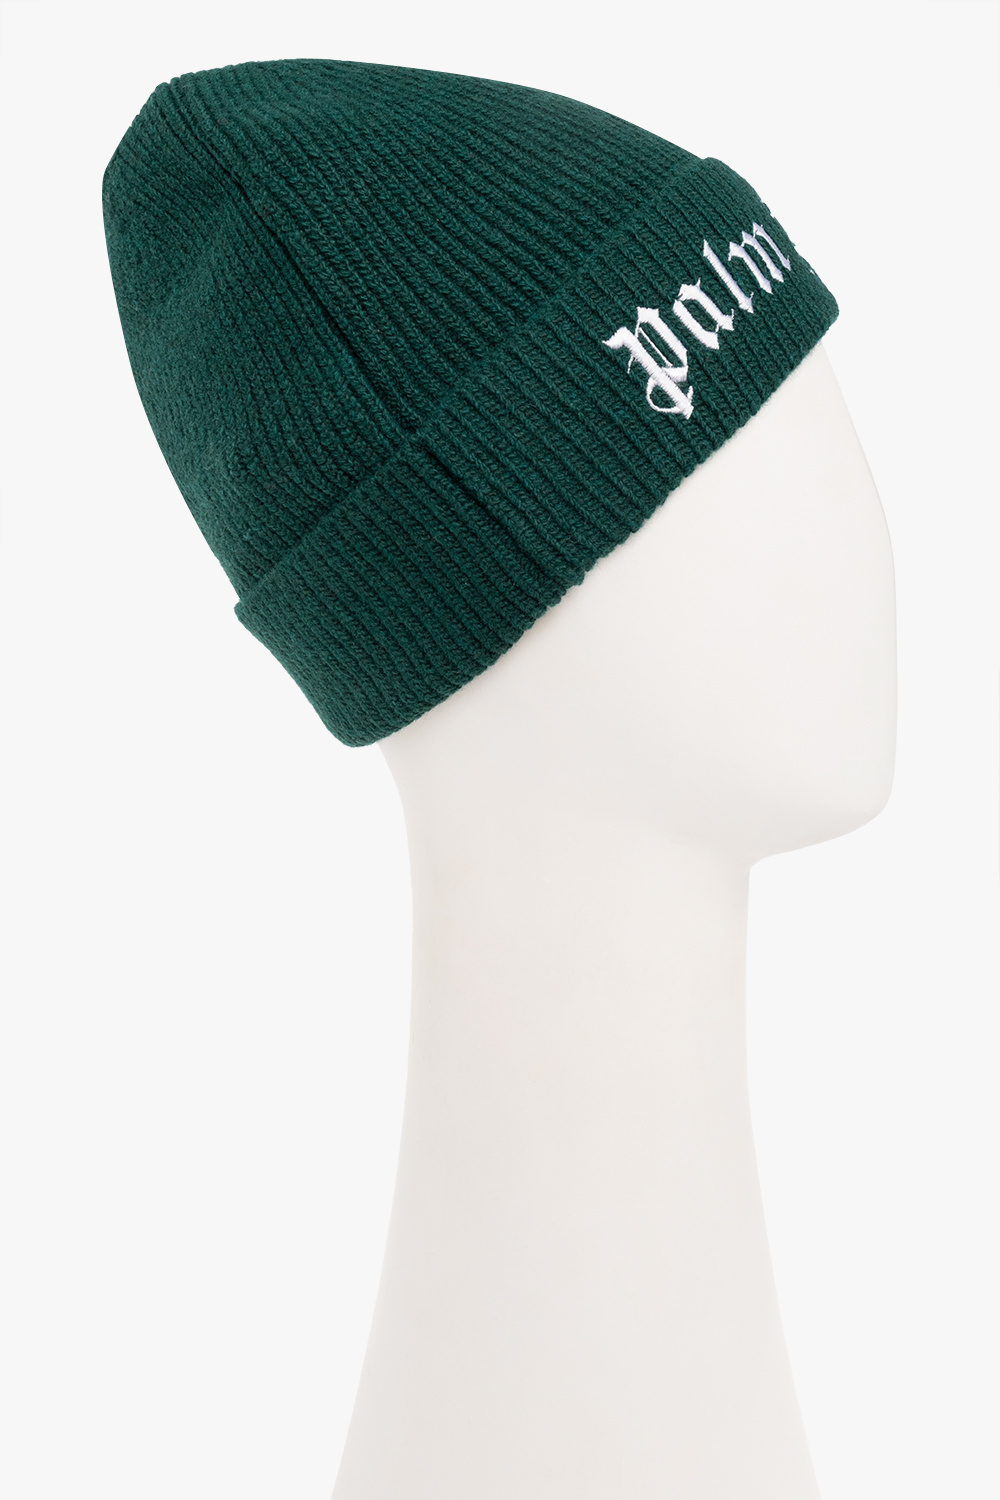 Palm Angels Kids Logo-embroidered beanie